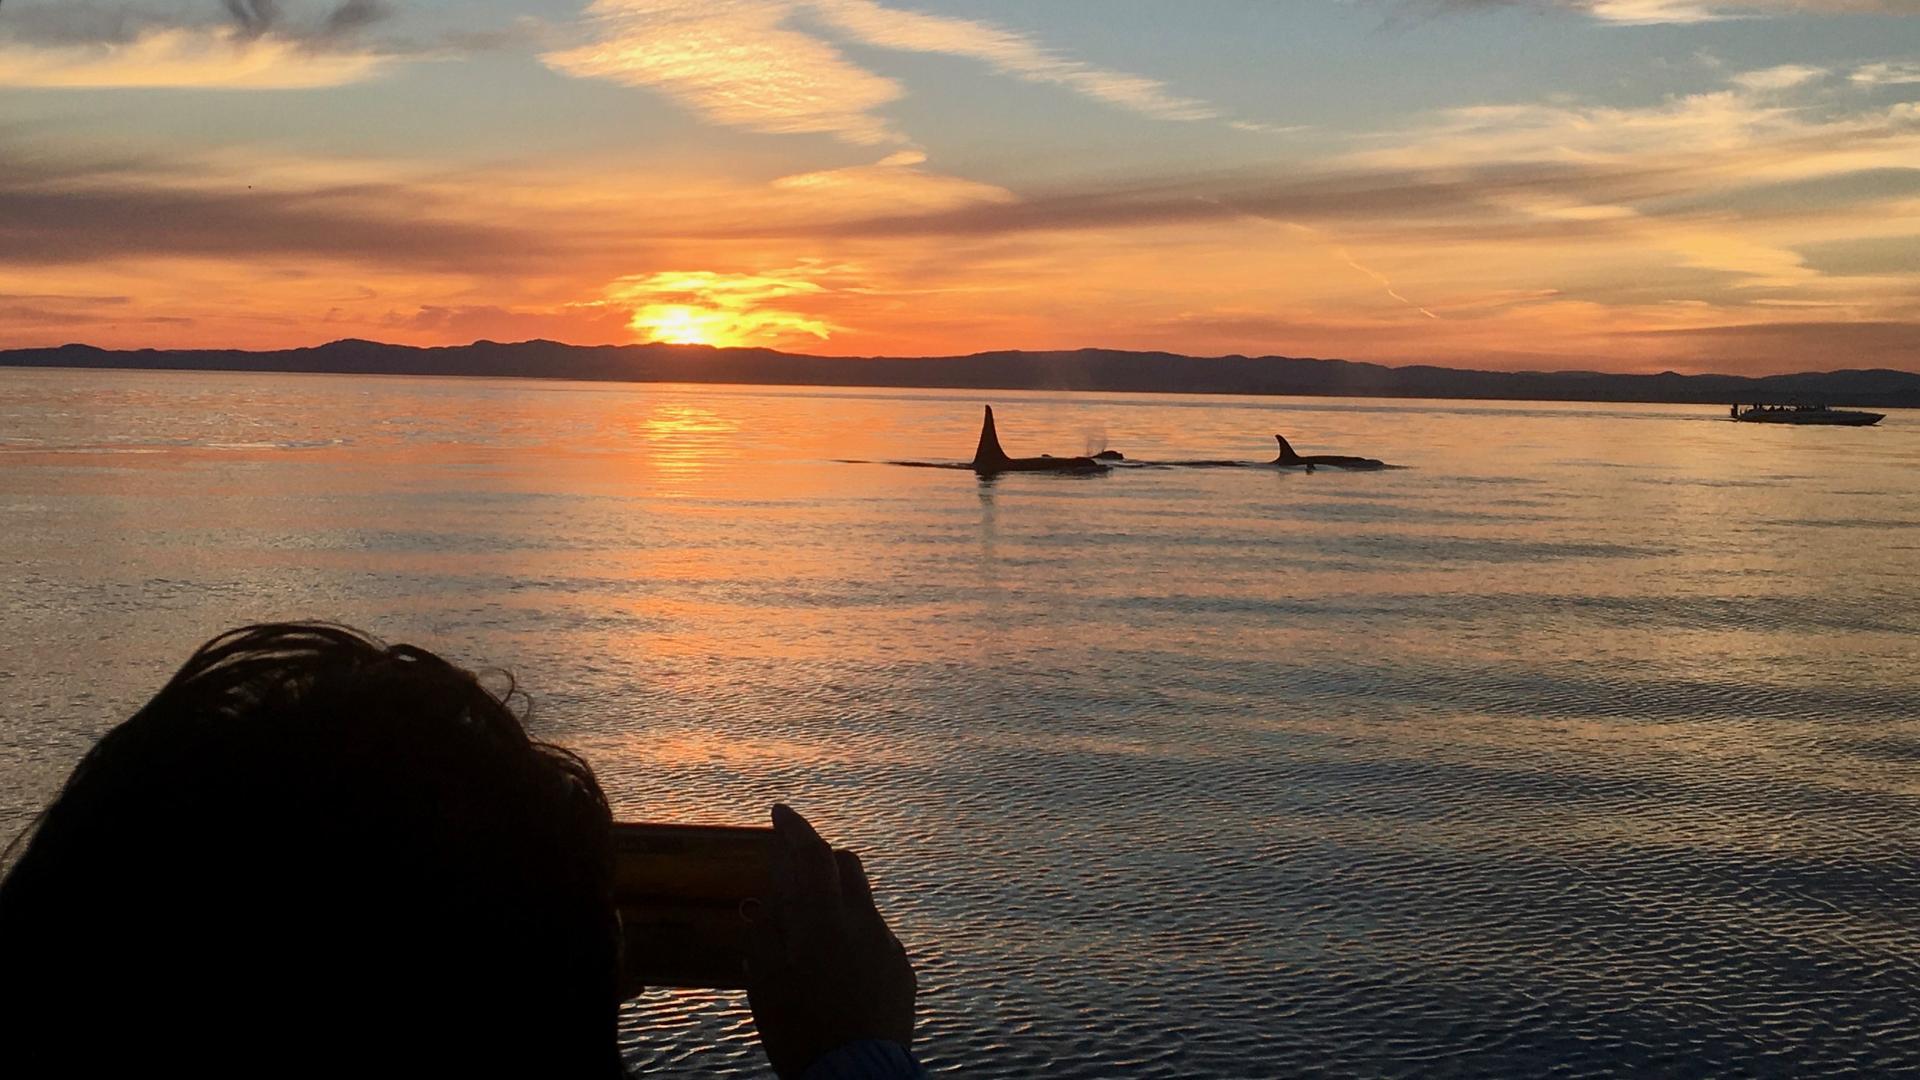 Eagle Wing Tours the first company to offer Sunset whale watching tours in Victoria